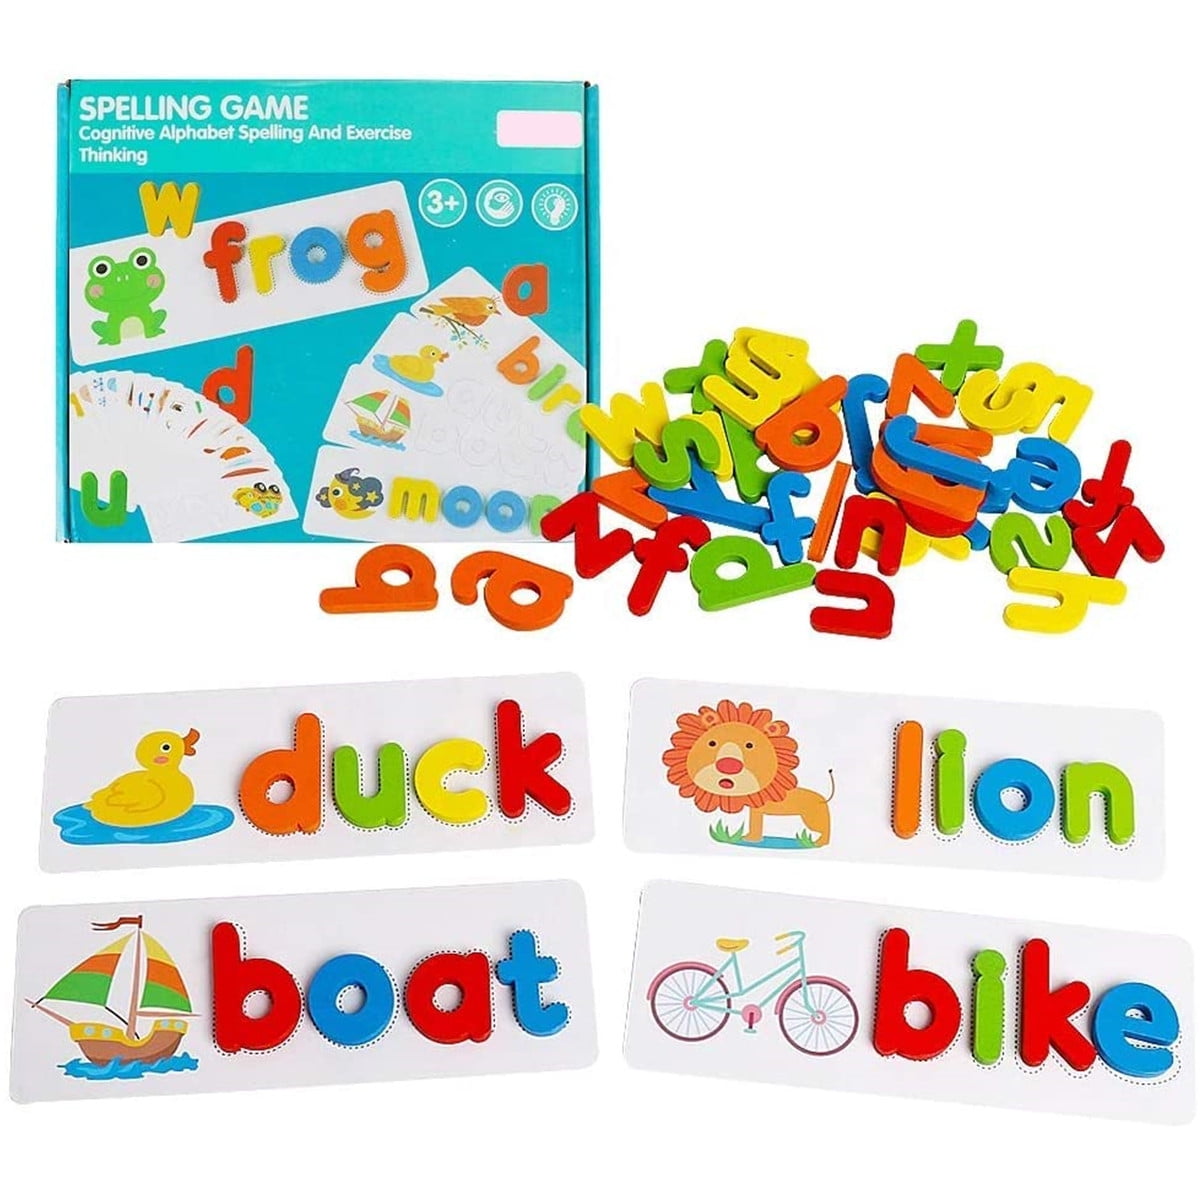 Wood Spelling Words Game Kids Toy Alphabet Early Learning Educational Animals Vehicle Learning Spelling Puzzles Toys Walmart Com Walmart Com